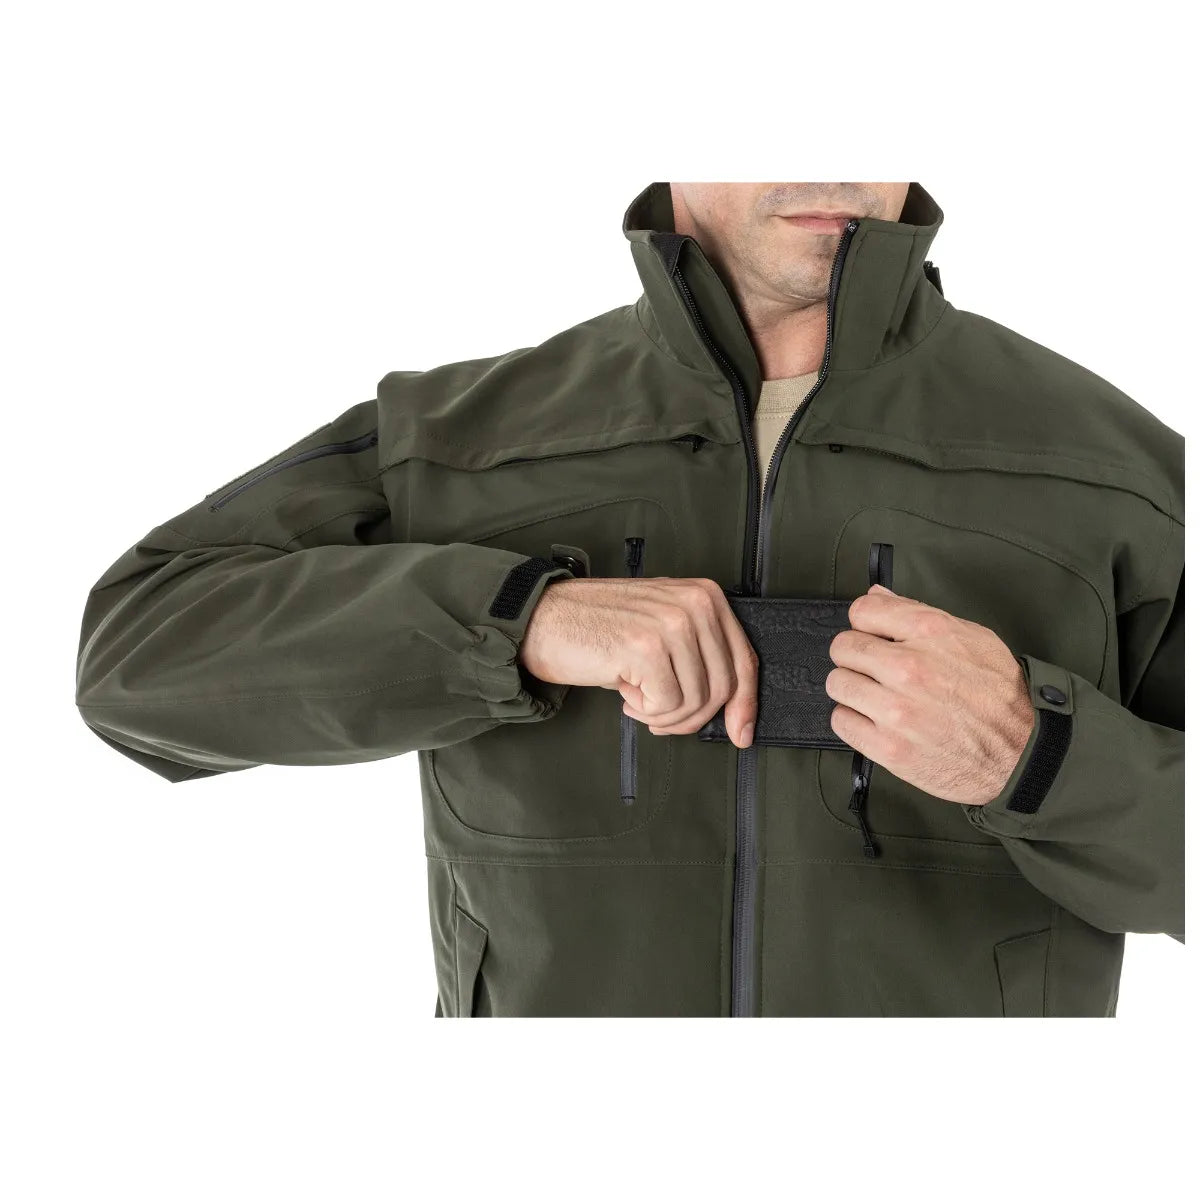 5.11 Tactical Sabre 2.0 Concealed Carry Jacket 48112 - Clothing & Accessories